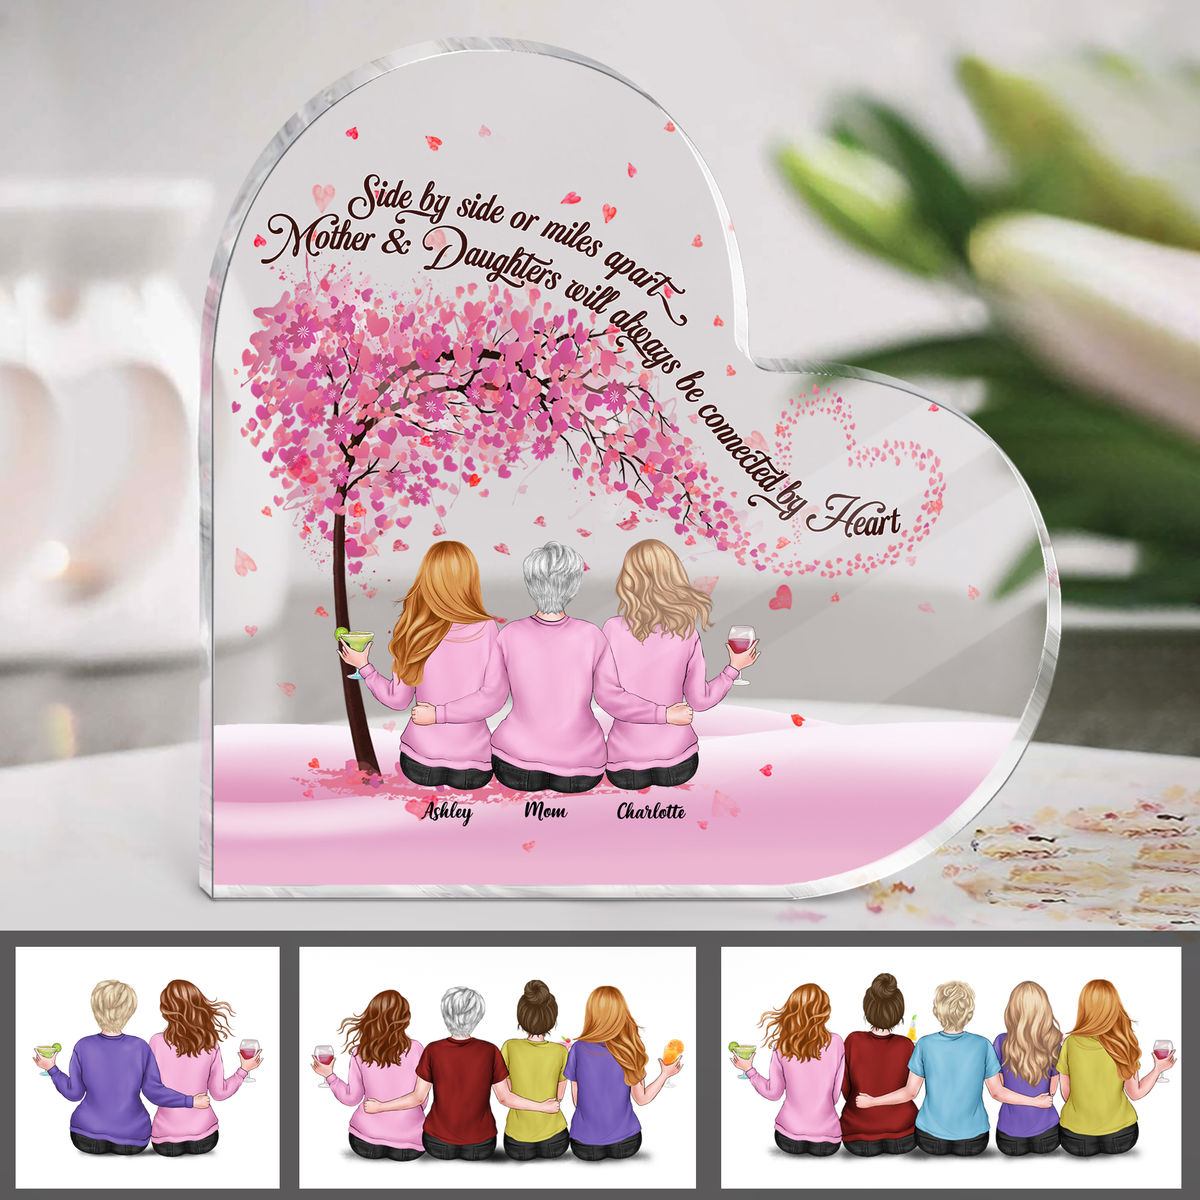 Side by side or miles apart, mother and daughters will always be connected by heart (Personalized body) (23548)